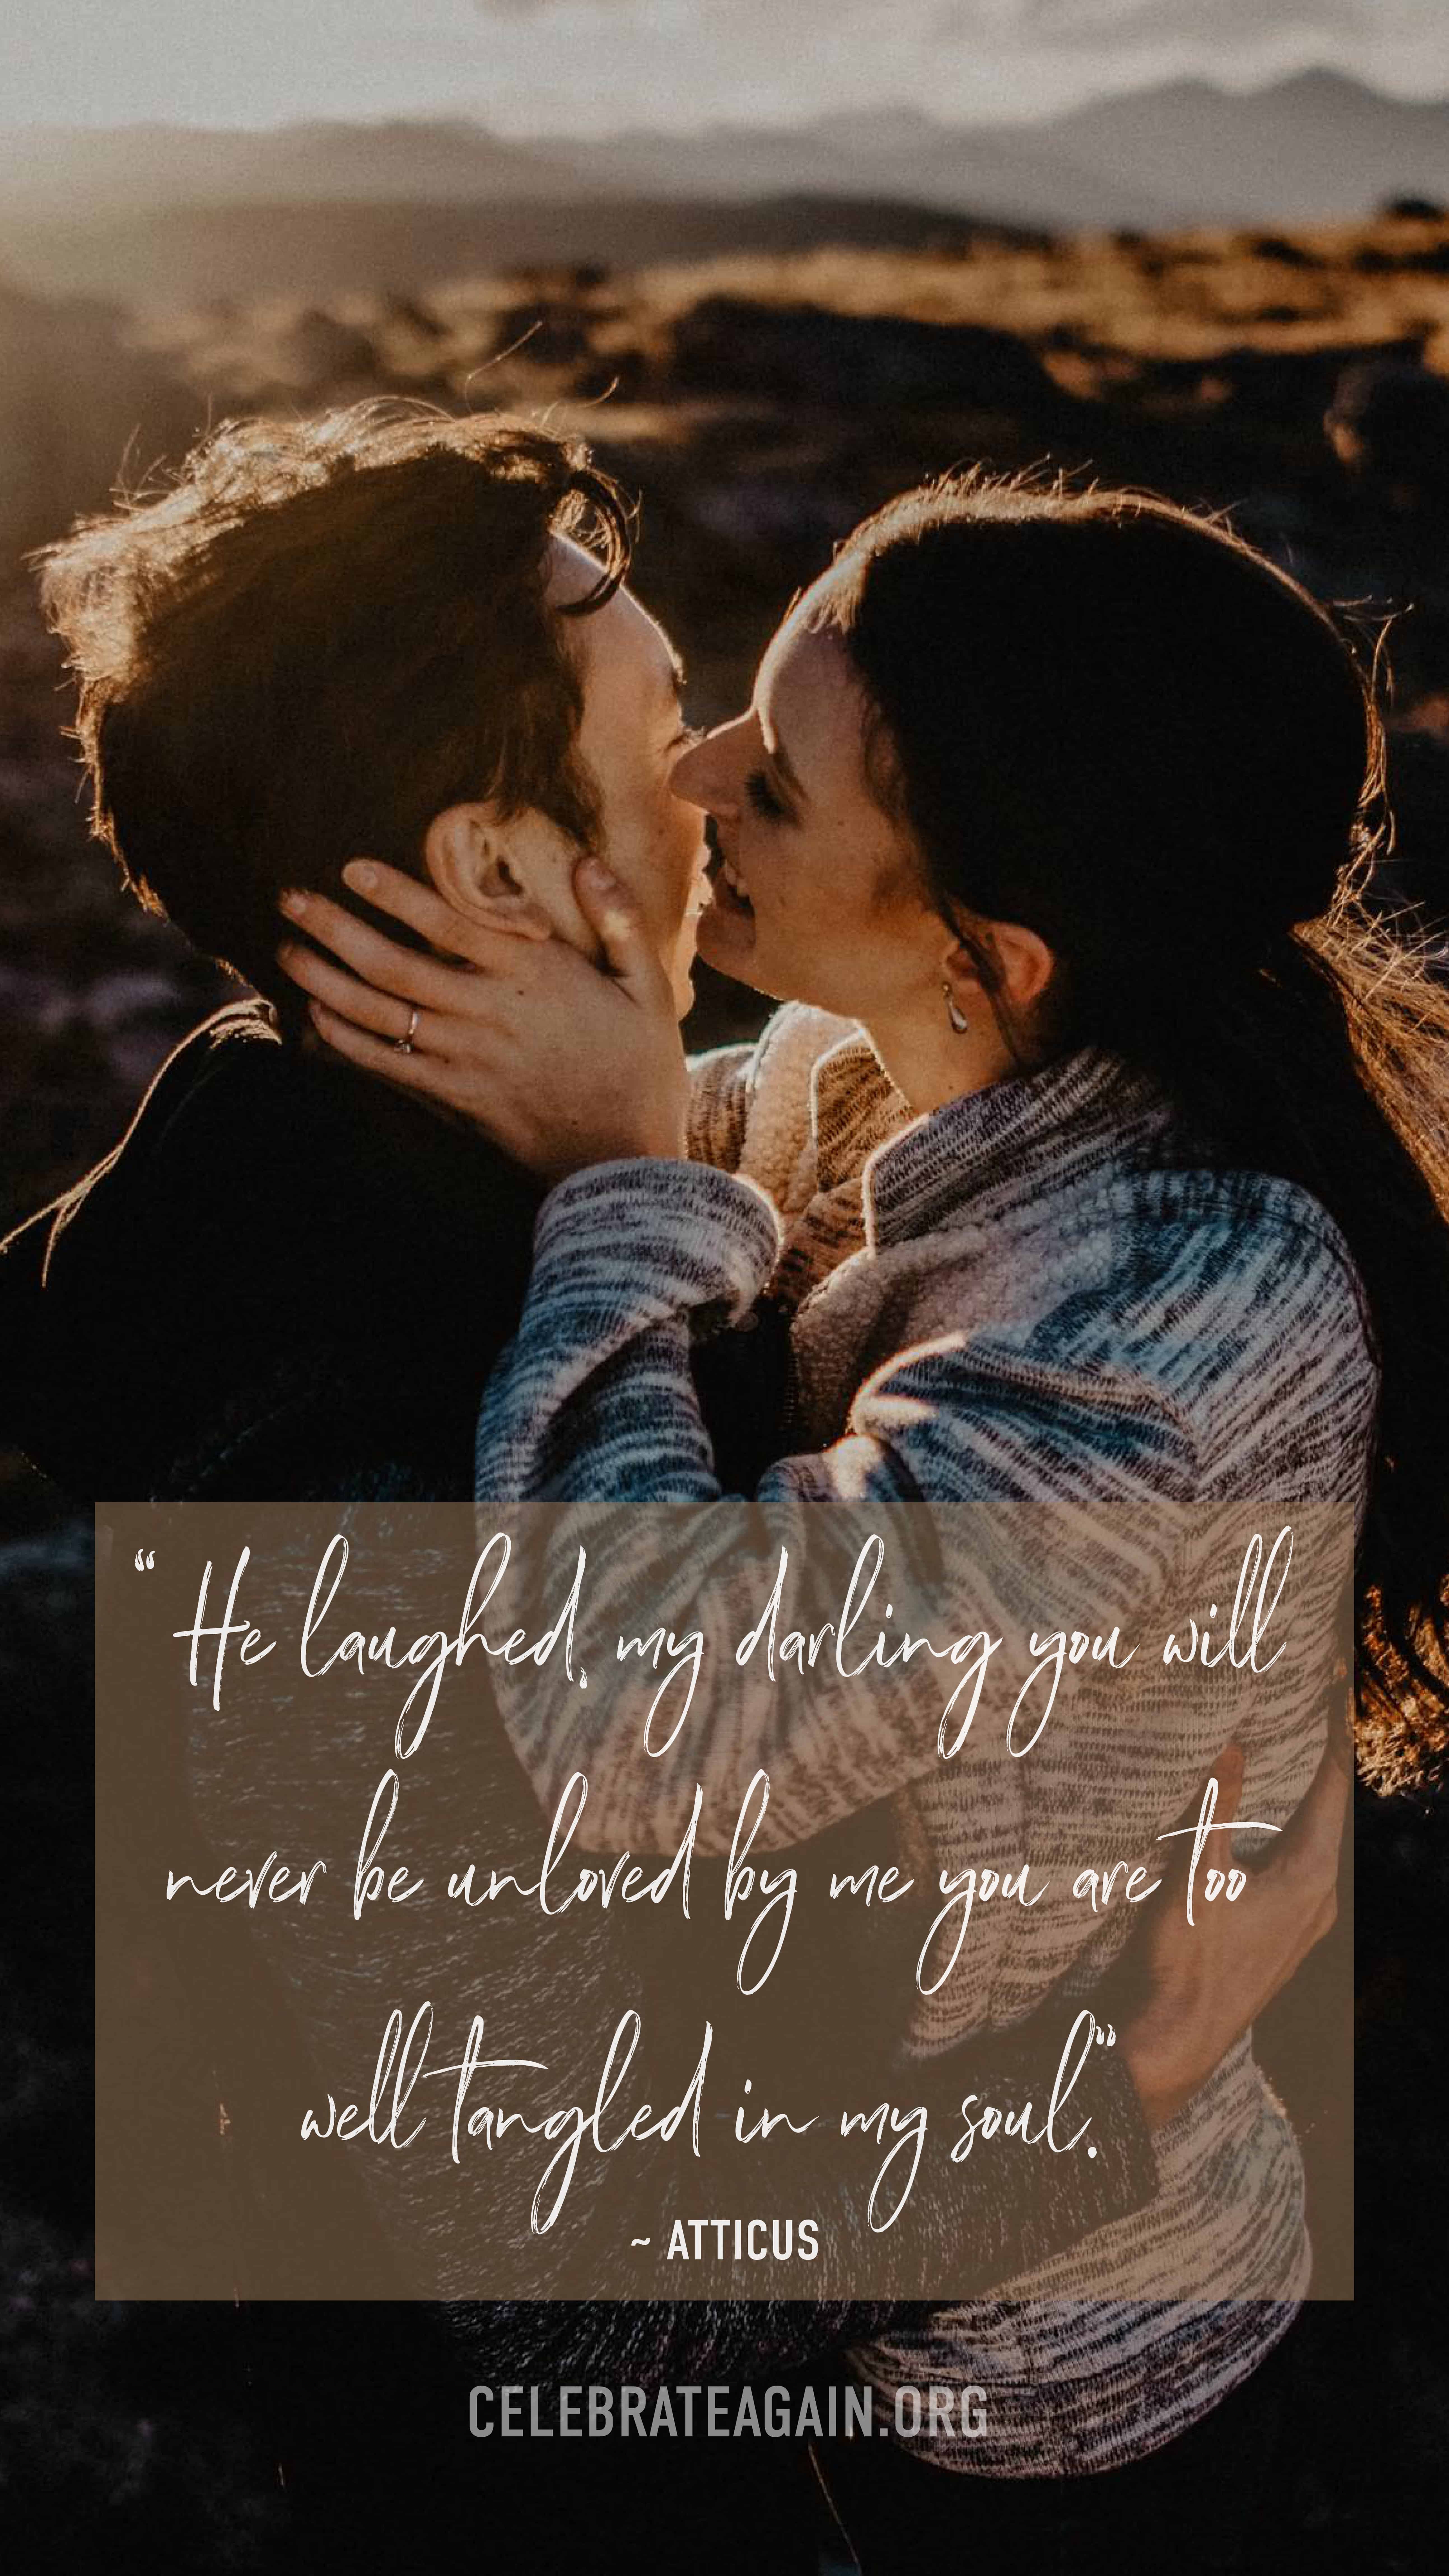 romantic love quote “ He laughed, my darling you will never be unloved by me you are too well tangled in my soul.” ― Atticus Poetry,The Dark Between Stars image of male laughing and female kissing his cheek as the sun illuminates them on a mountain top image by celebrateagain